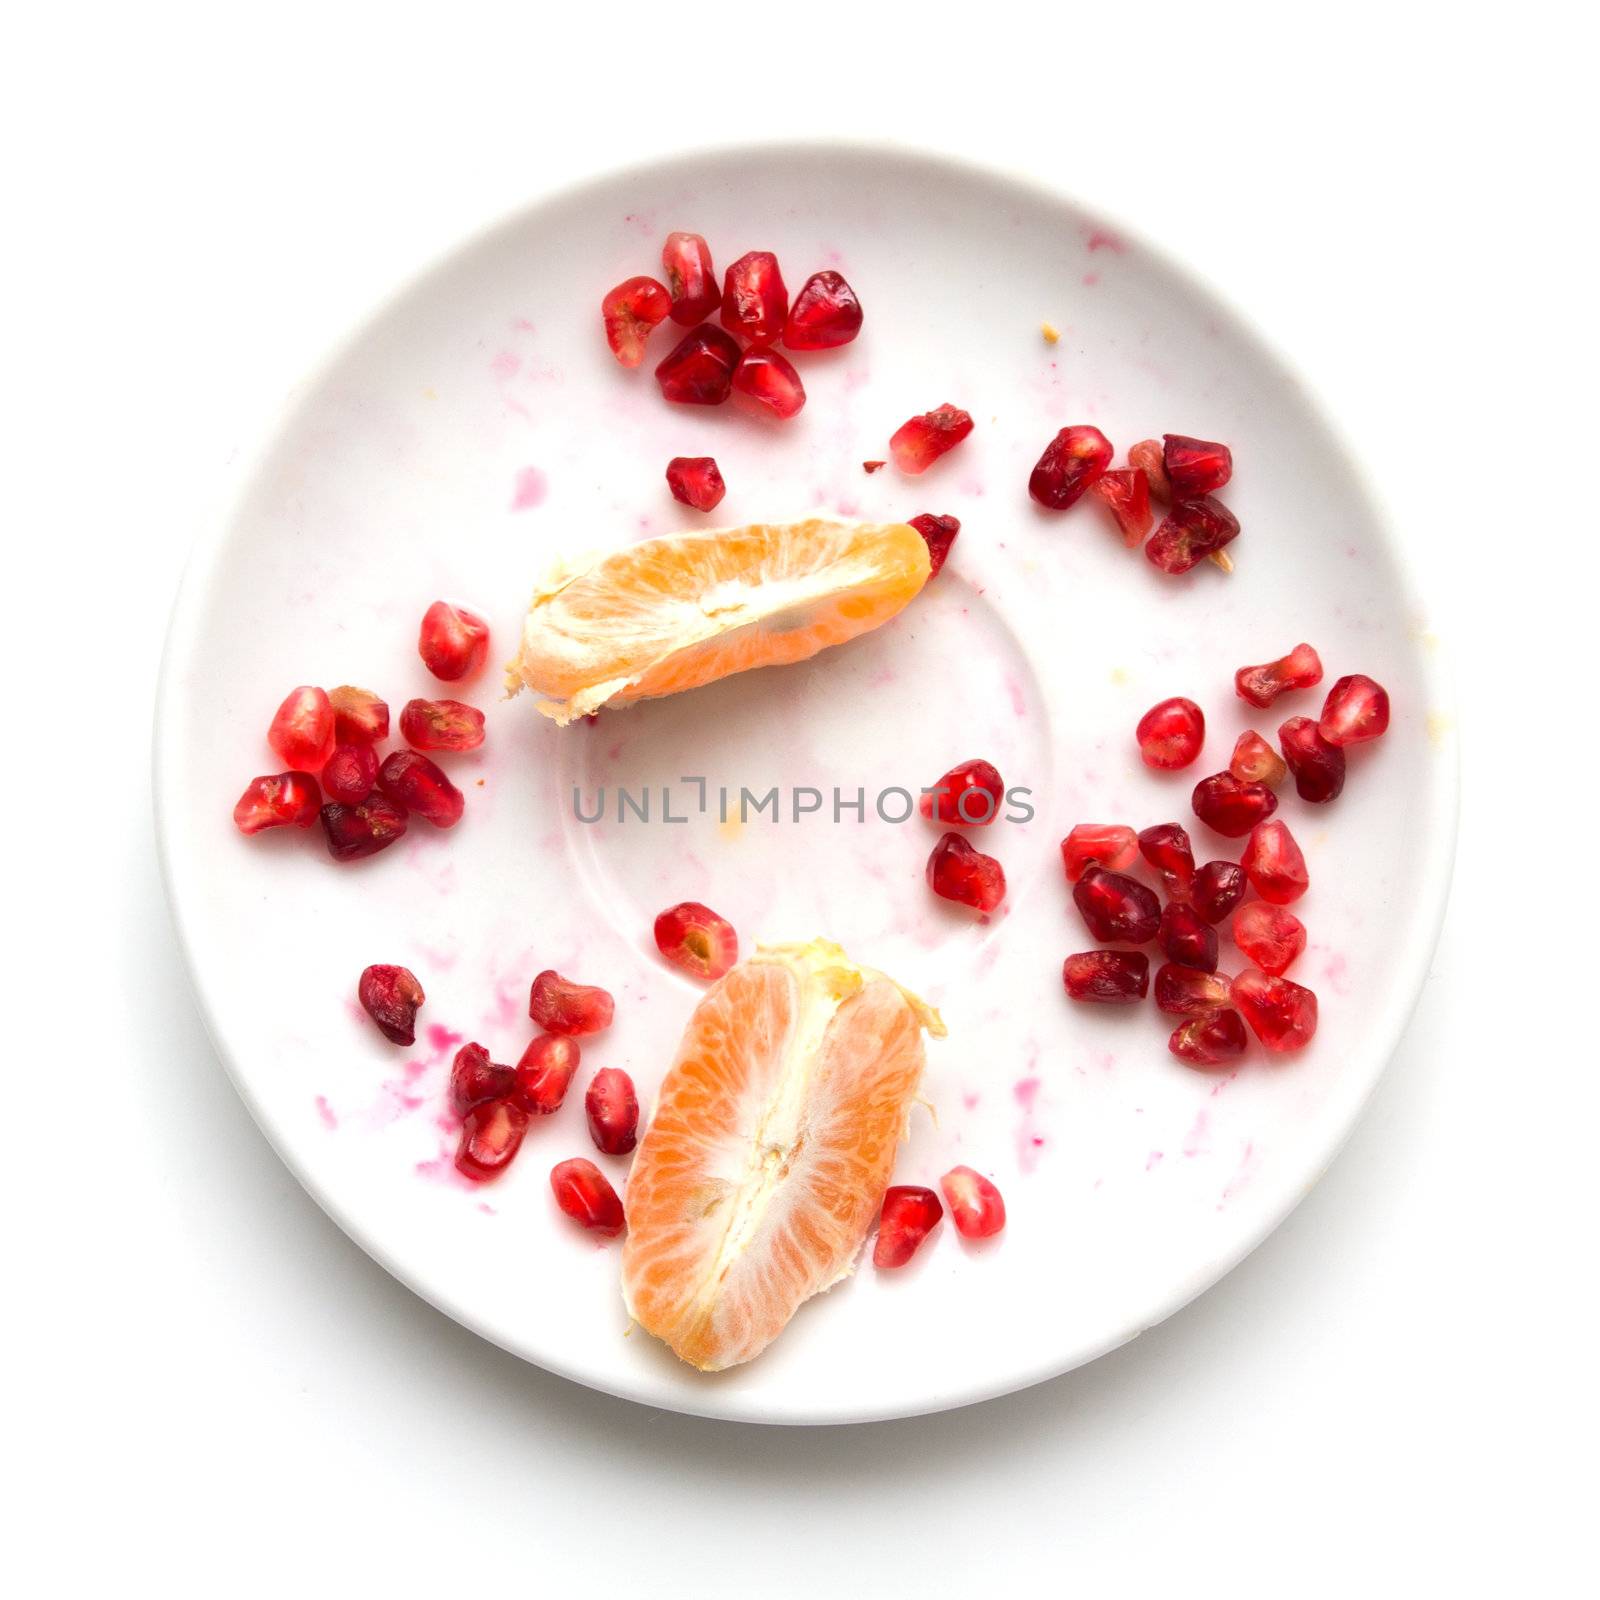 Pomegranate with an orange on a plate on a white background by schankz